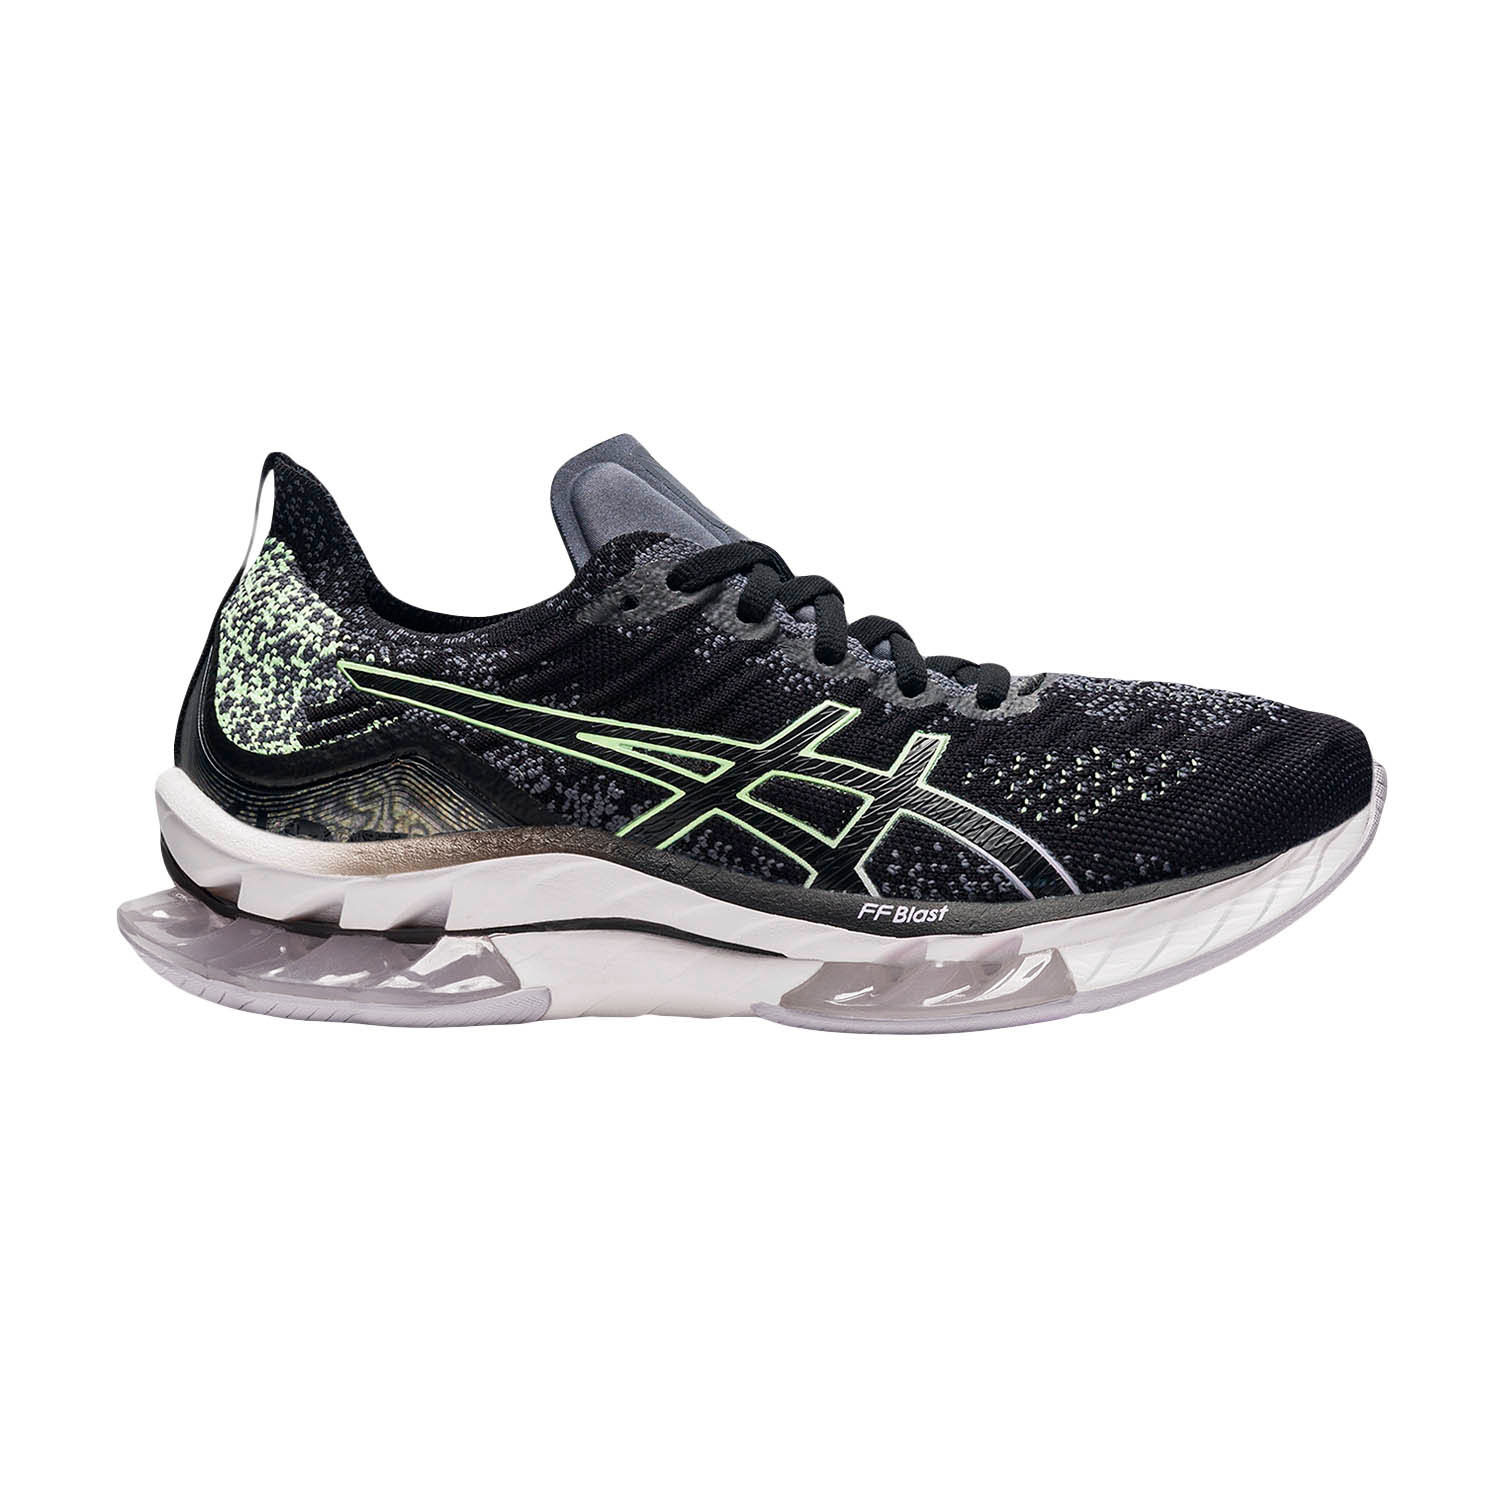 On a daily basis Operate tailor Asics Gel Kinsei Blast Women's Running Shoes - Black